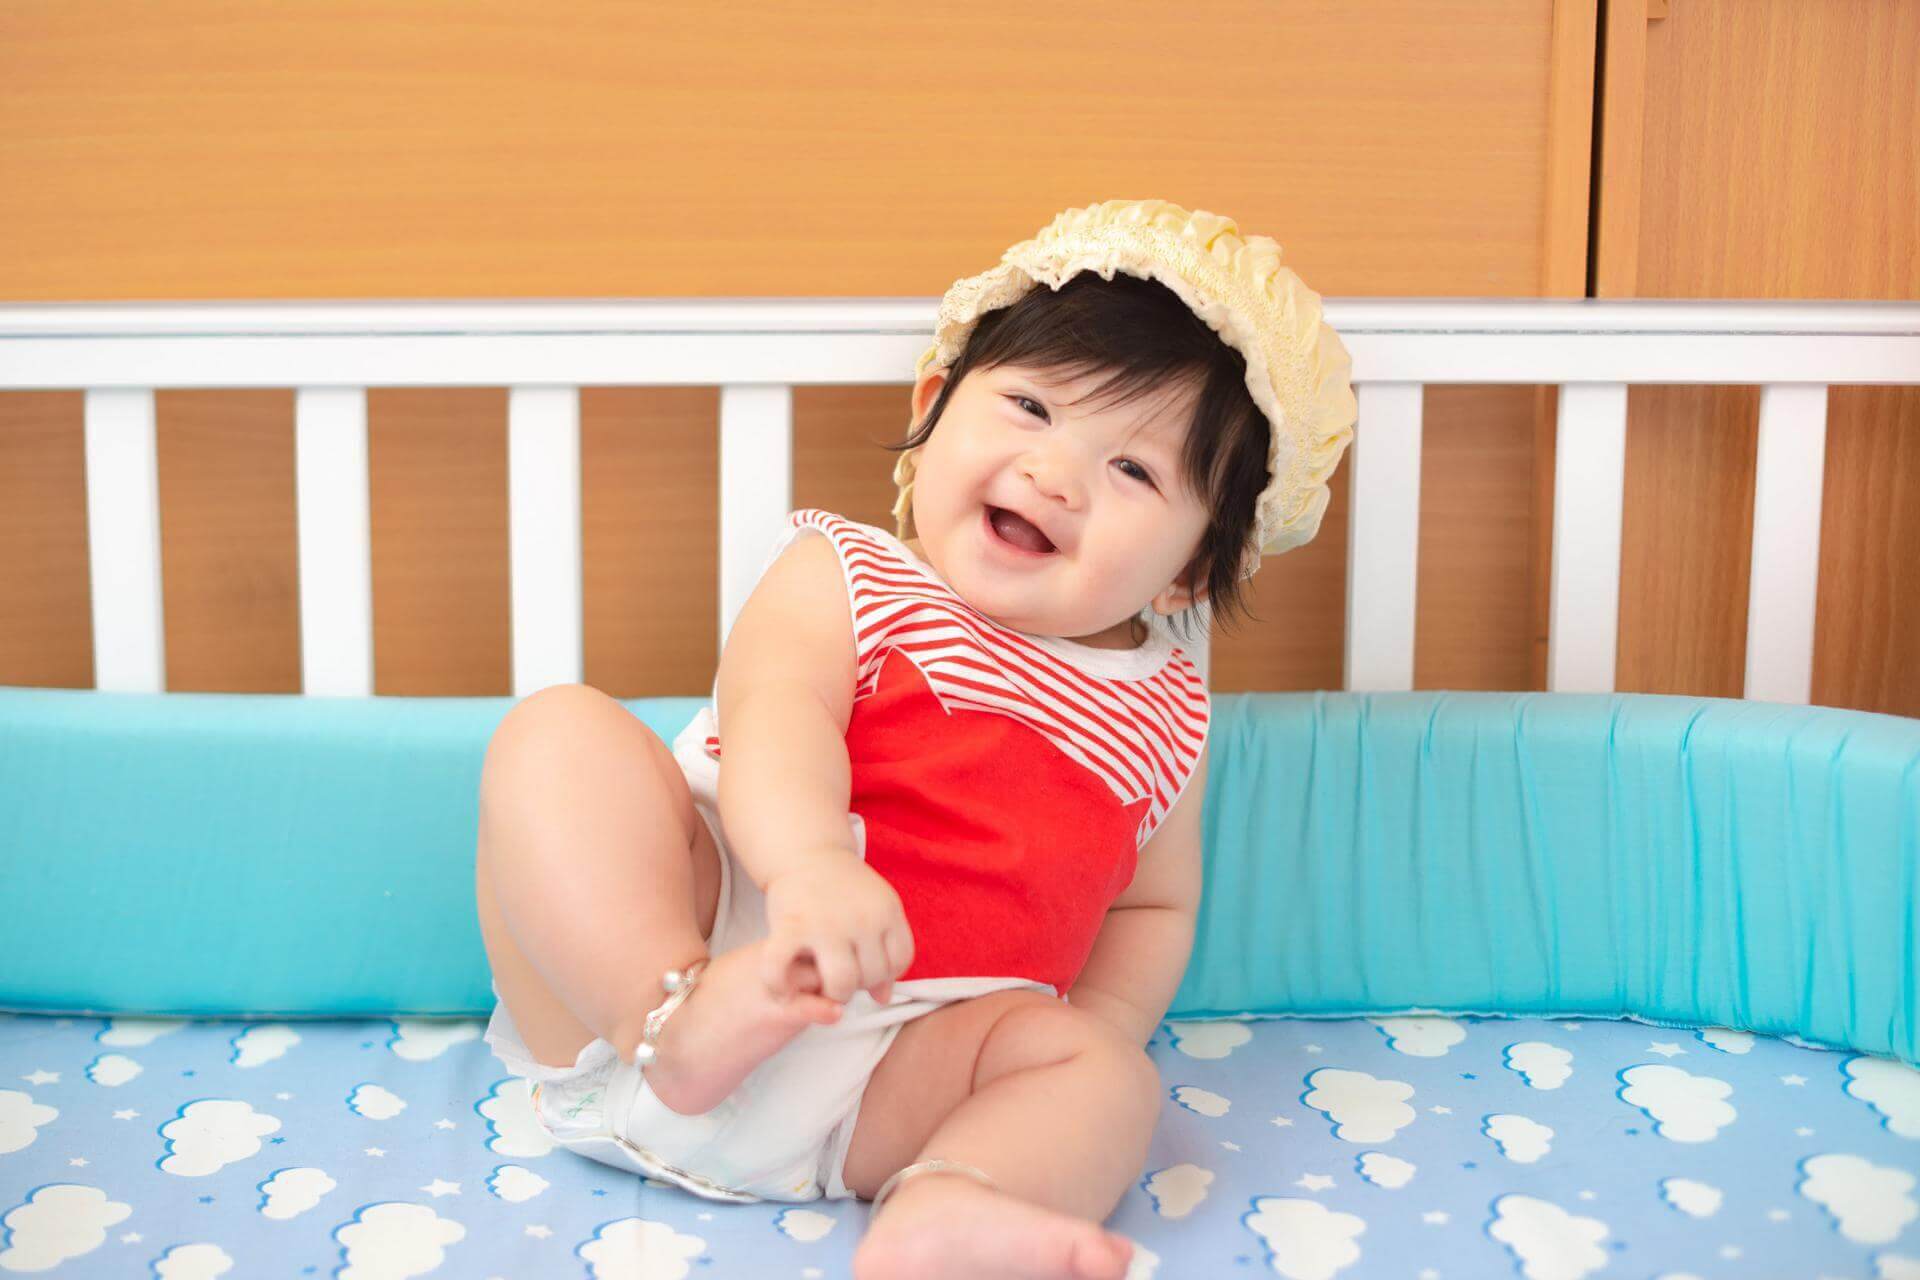 METHODS TO PREVENT DIAPER RASH FOR HEALTHY AND HAPPY BABIES